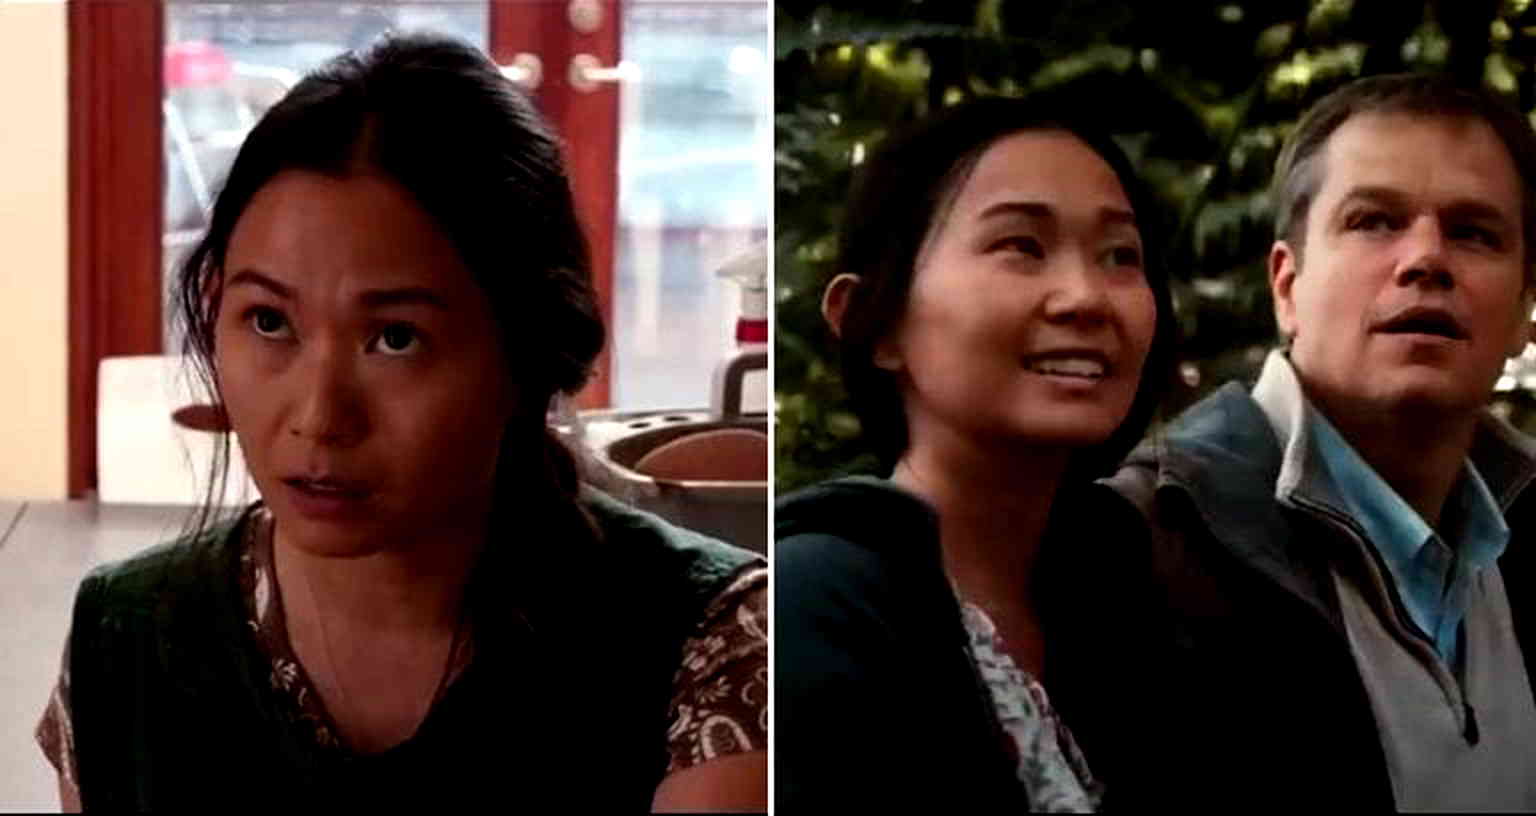 Actress Hong Chau Called ‘Racist’ For Vietnamese Accent in ‘Downsizing’